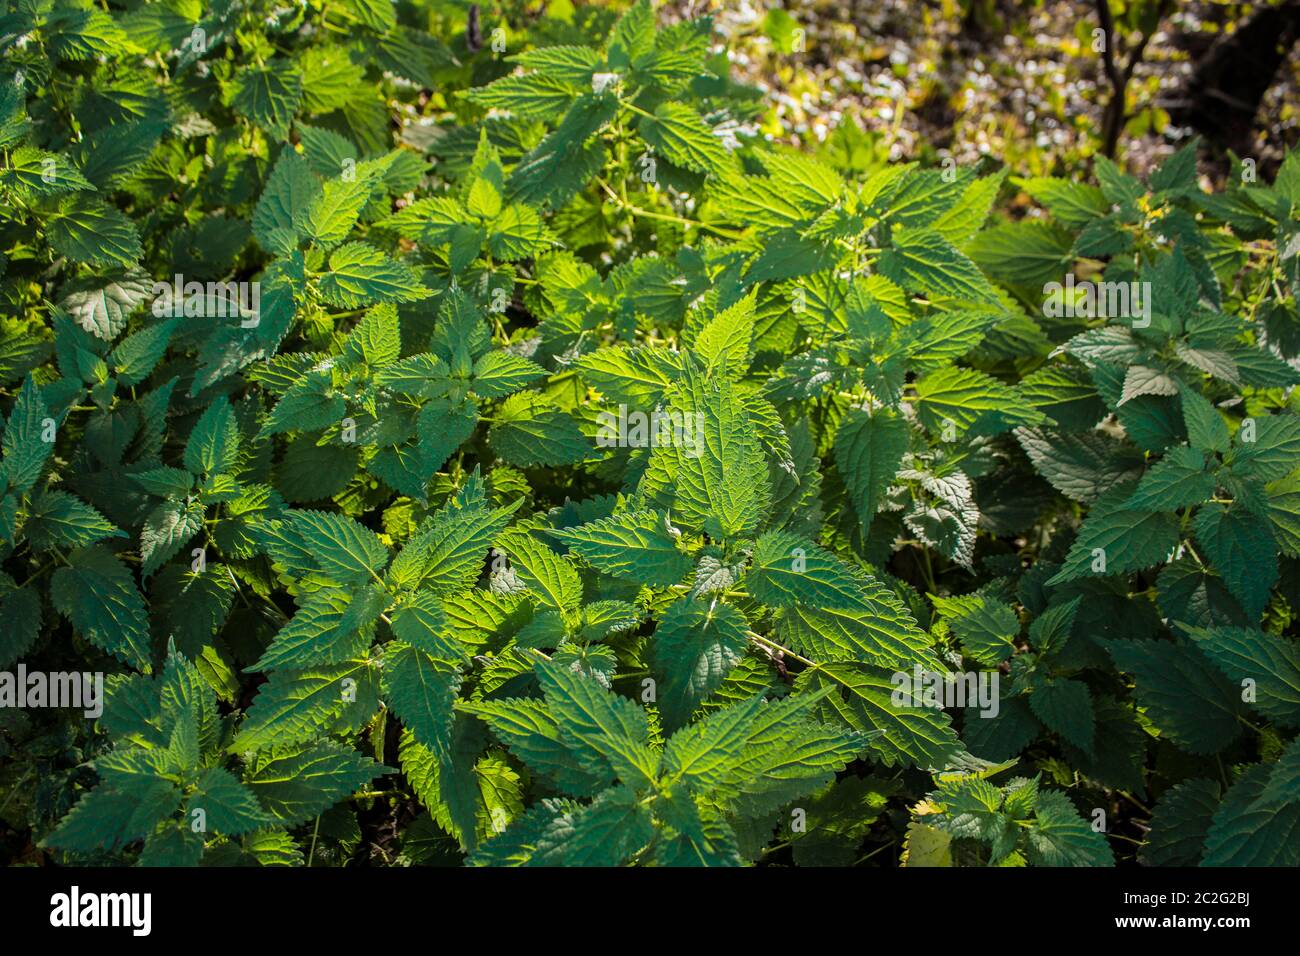 Satisfied, fresh nettles with sunbeams. Stock Photo